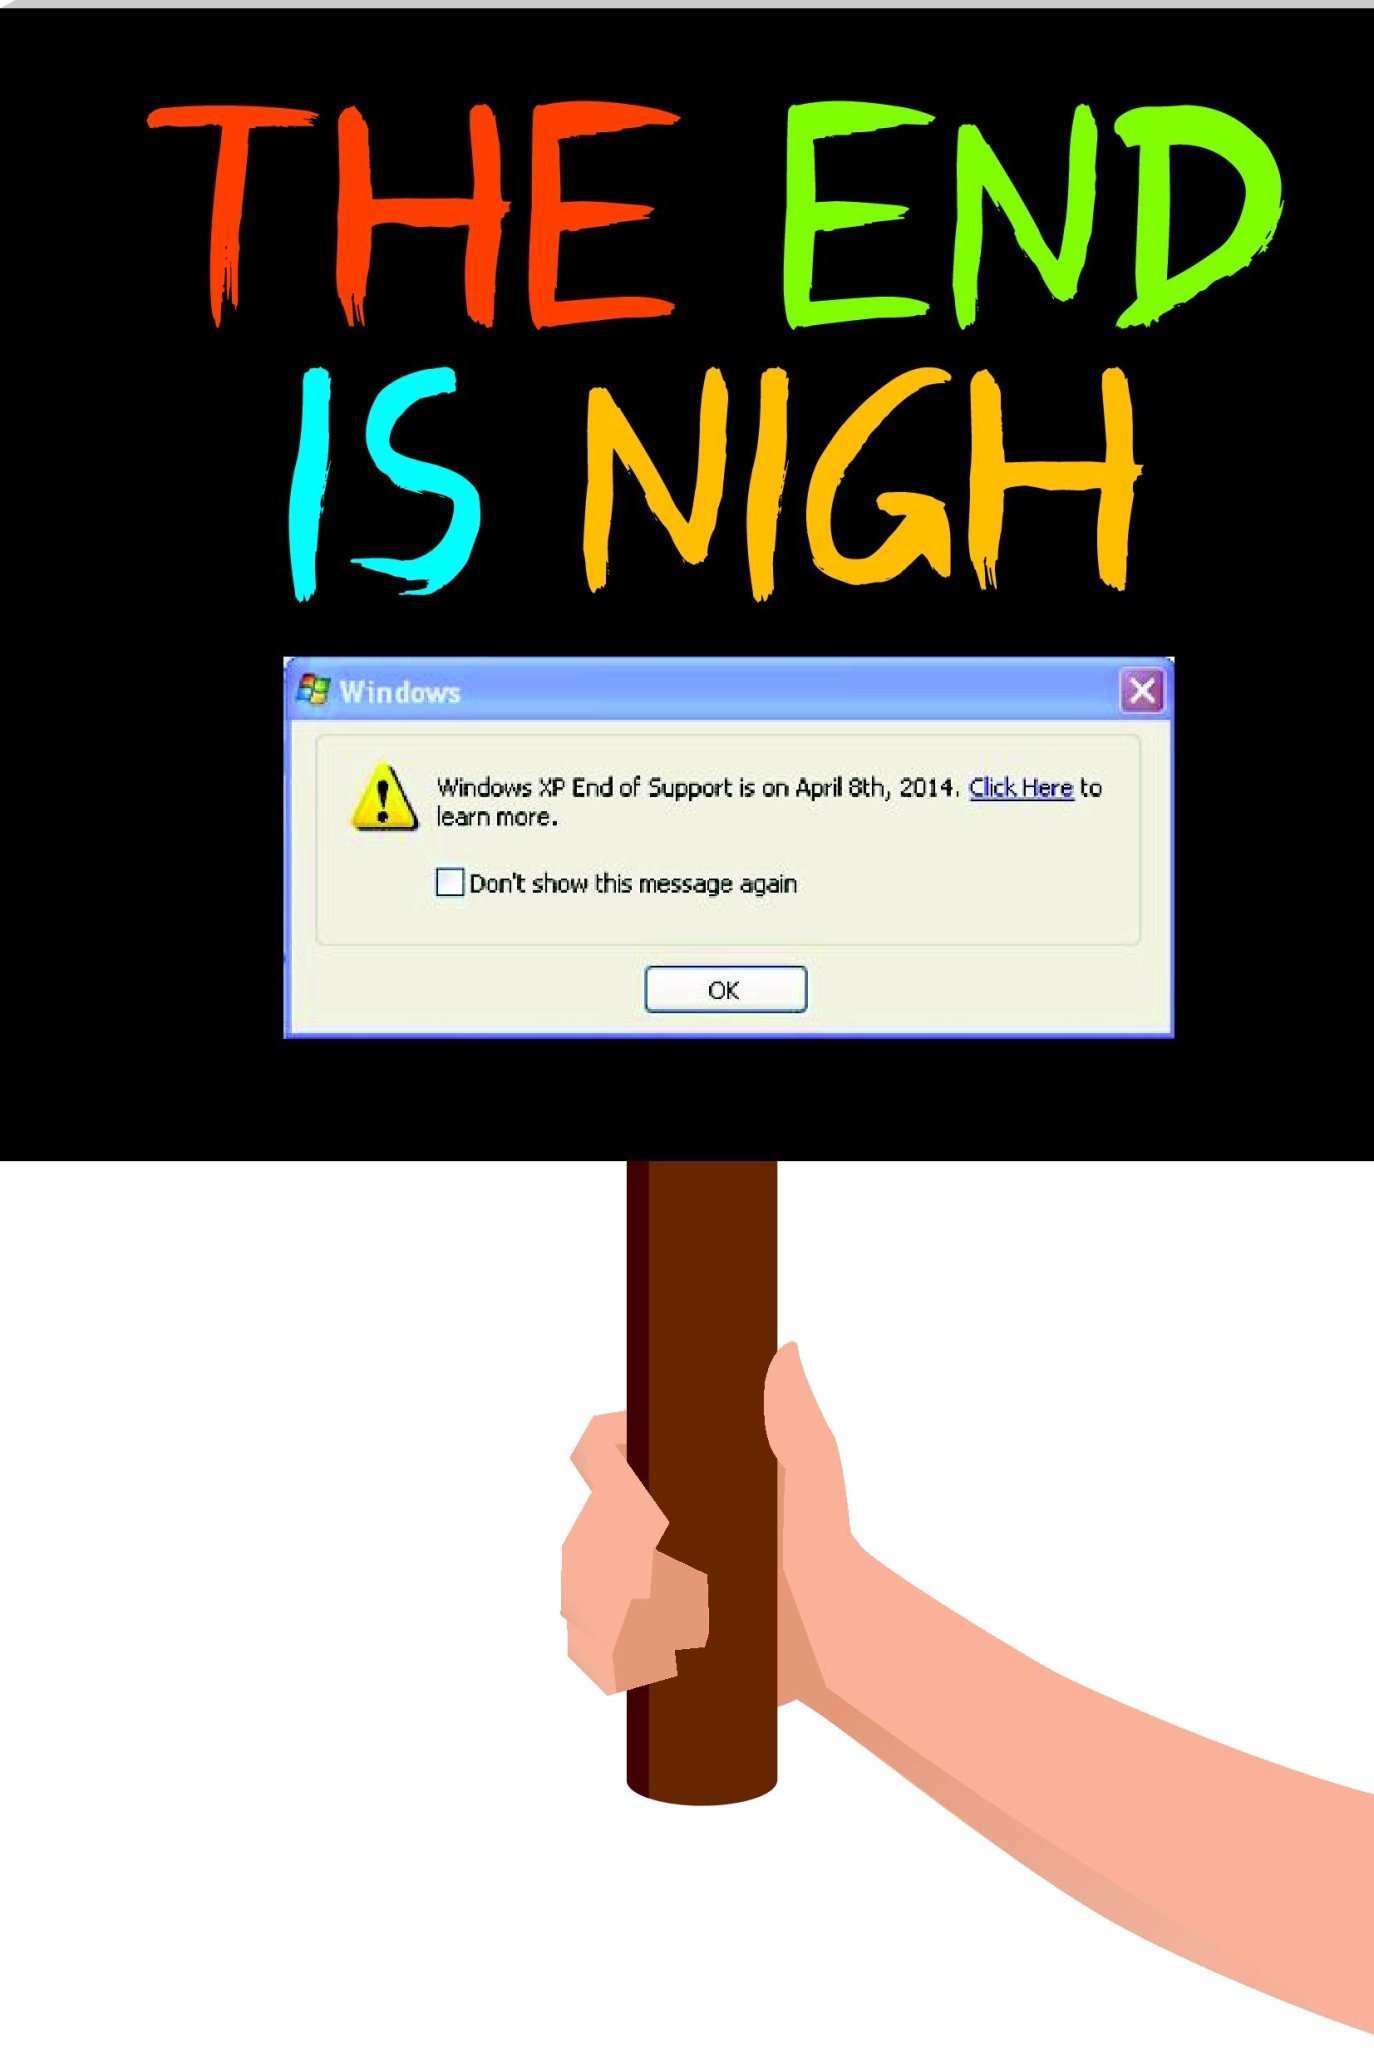 Windows end of support.